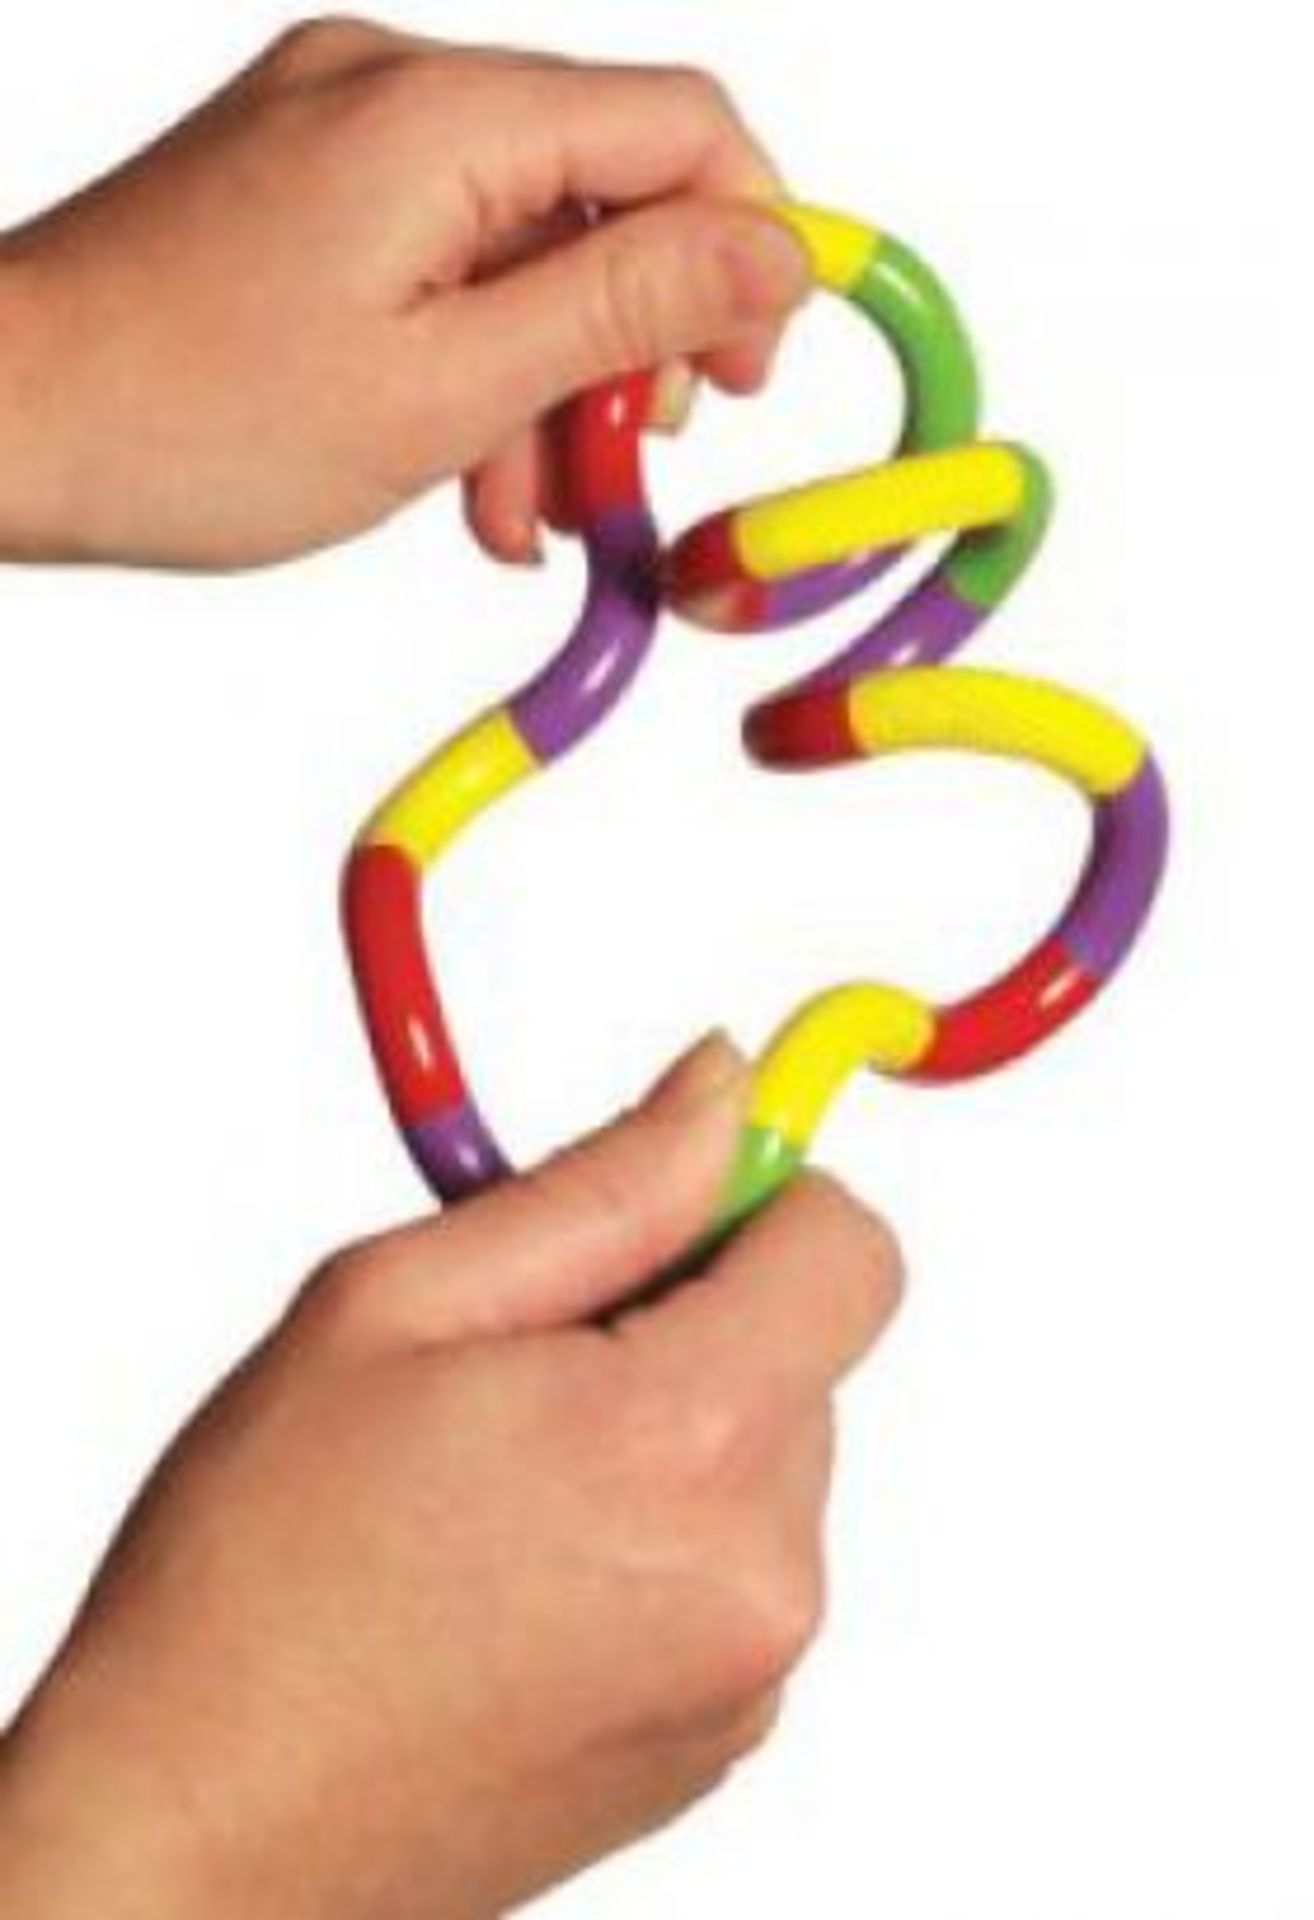 5 BRAND NEW BAGGED TANGLE TOYS